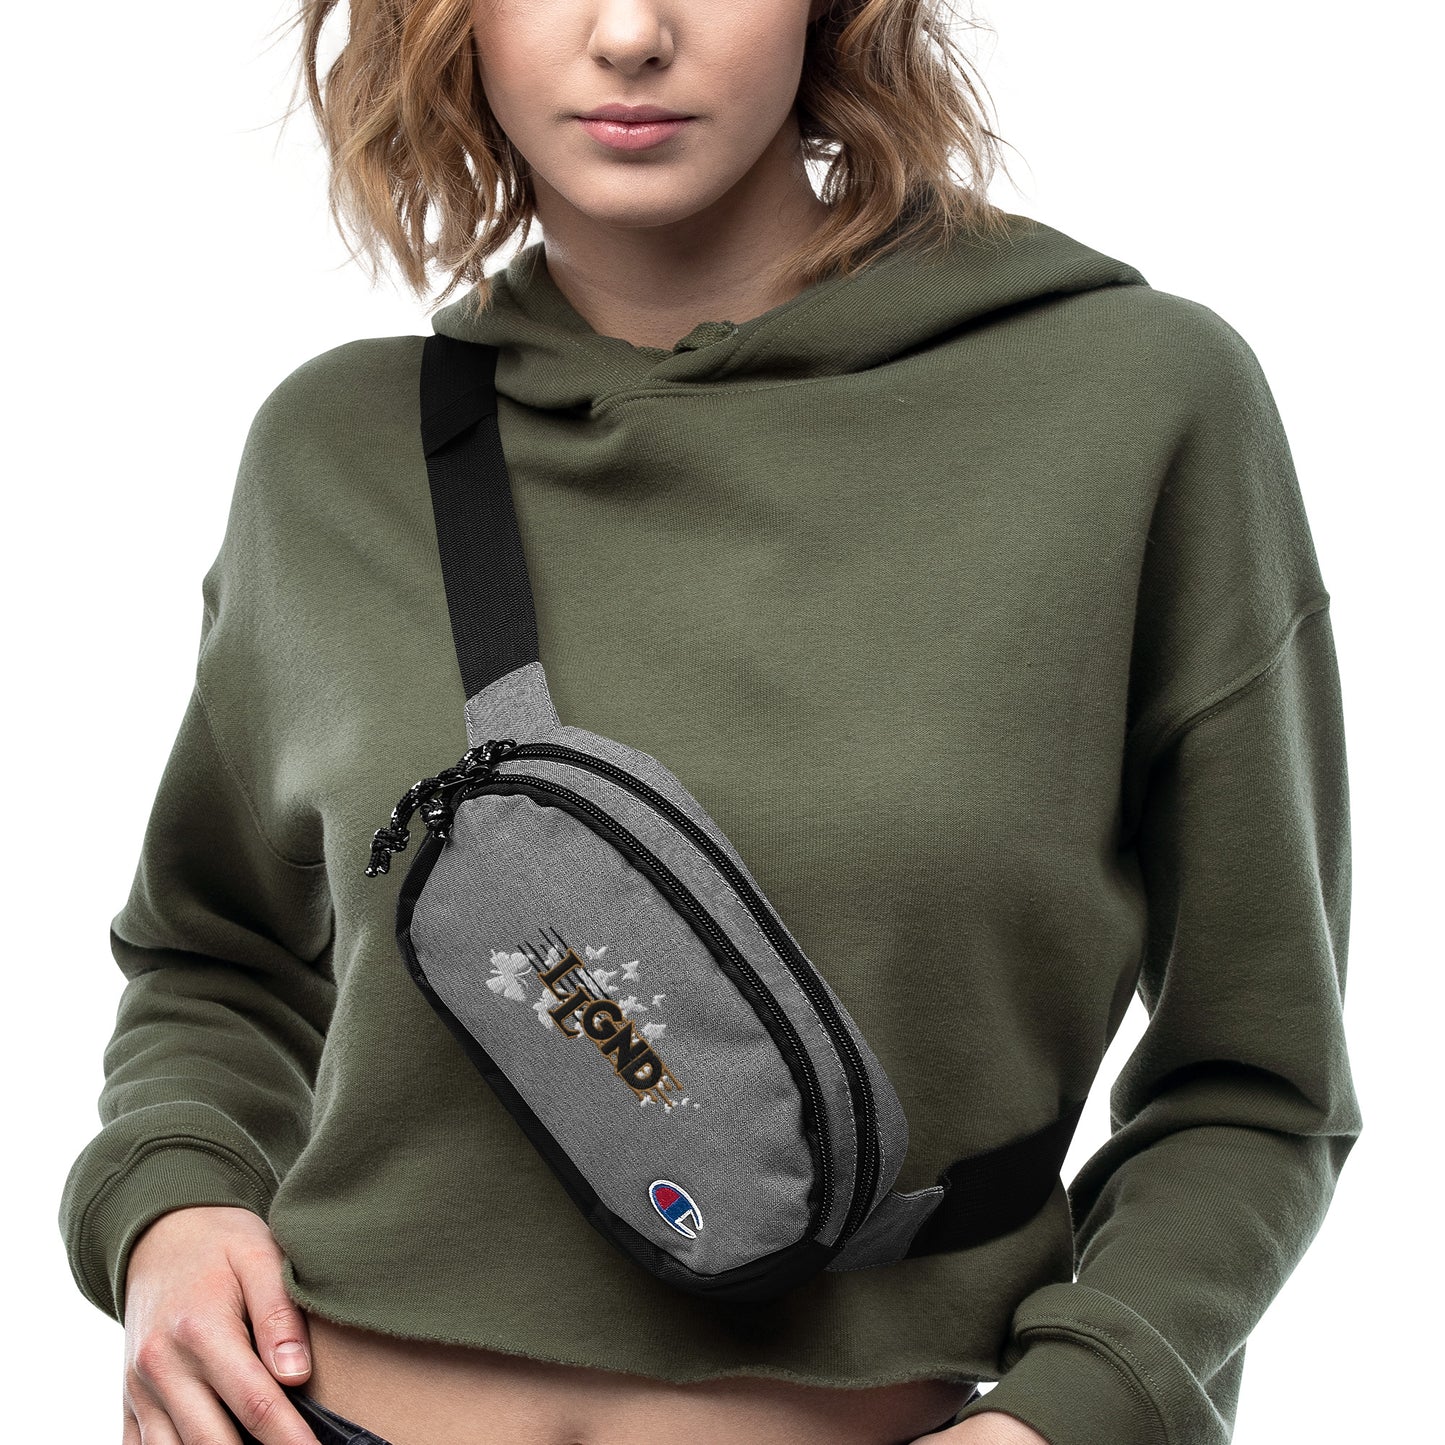 INSPIRE CHAMPION FANNY PACK